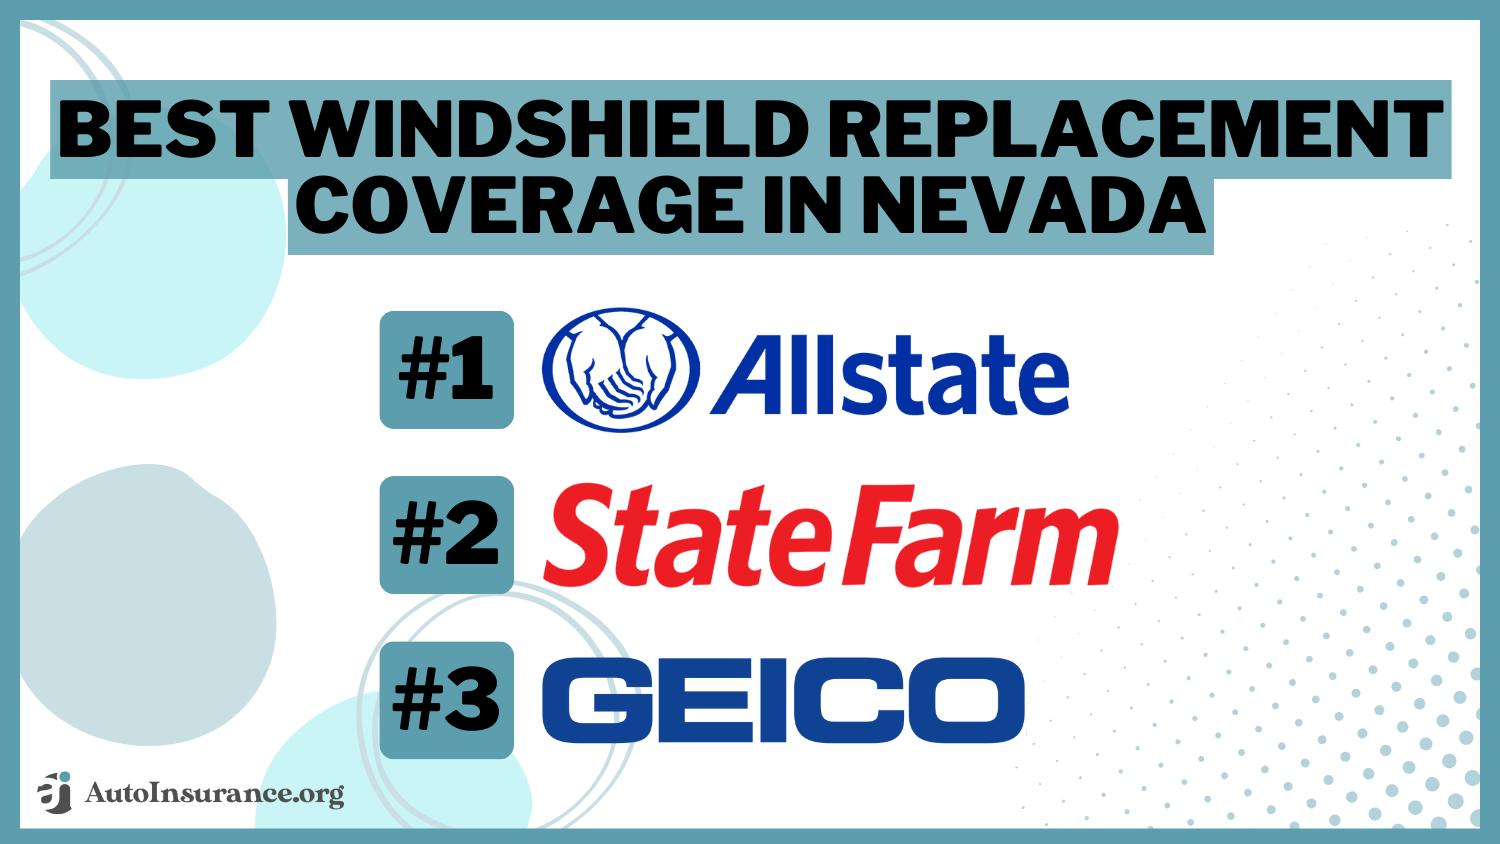 Best Windshield Replacement Coverage in Nevada